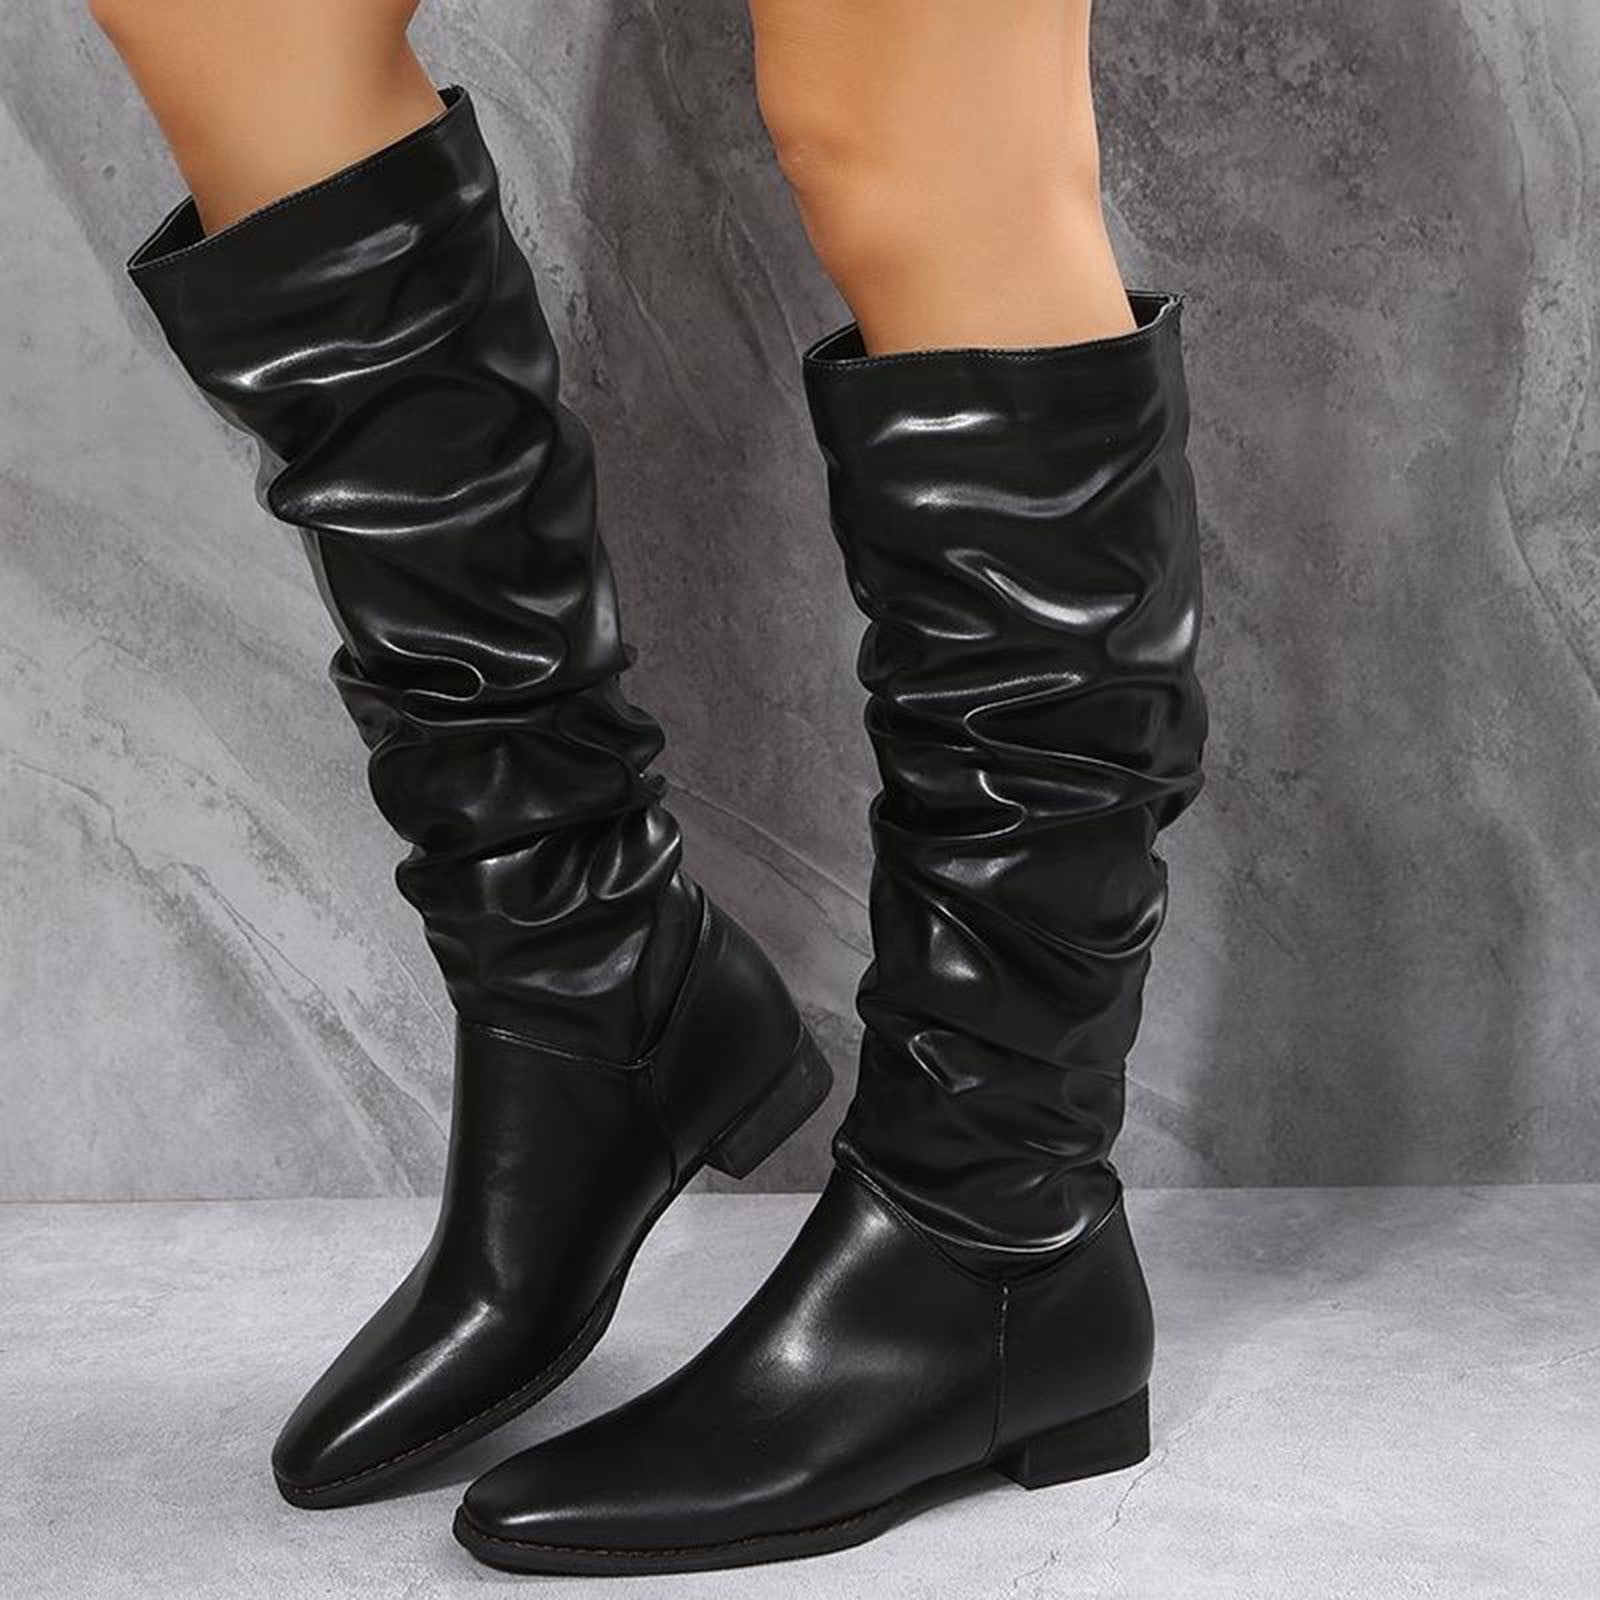 Womens Boots Fashion Solid Color Leather d Pointed Toe Flat Long Boots Black 6.5 Boots Women - Walmart.com